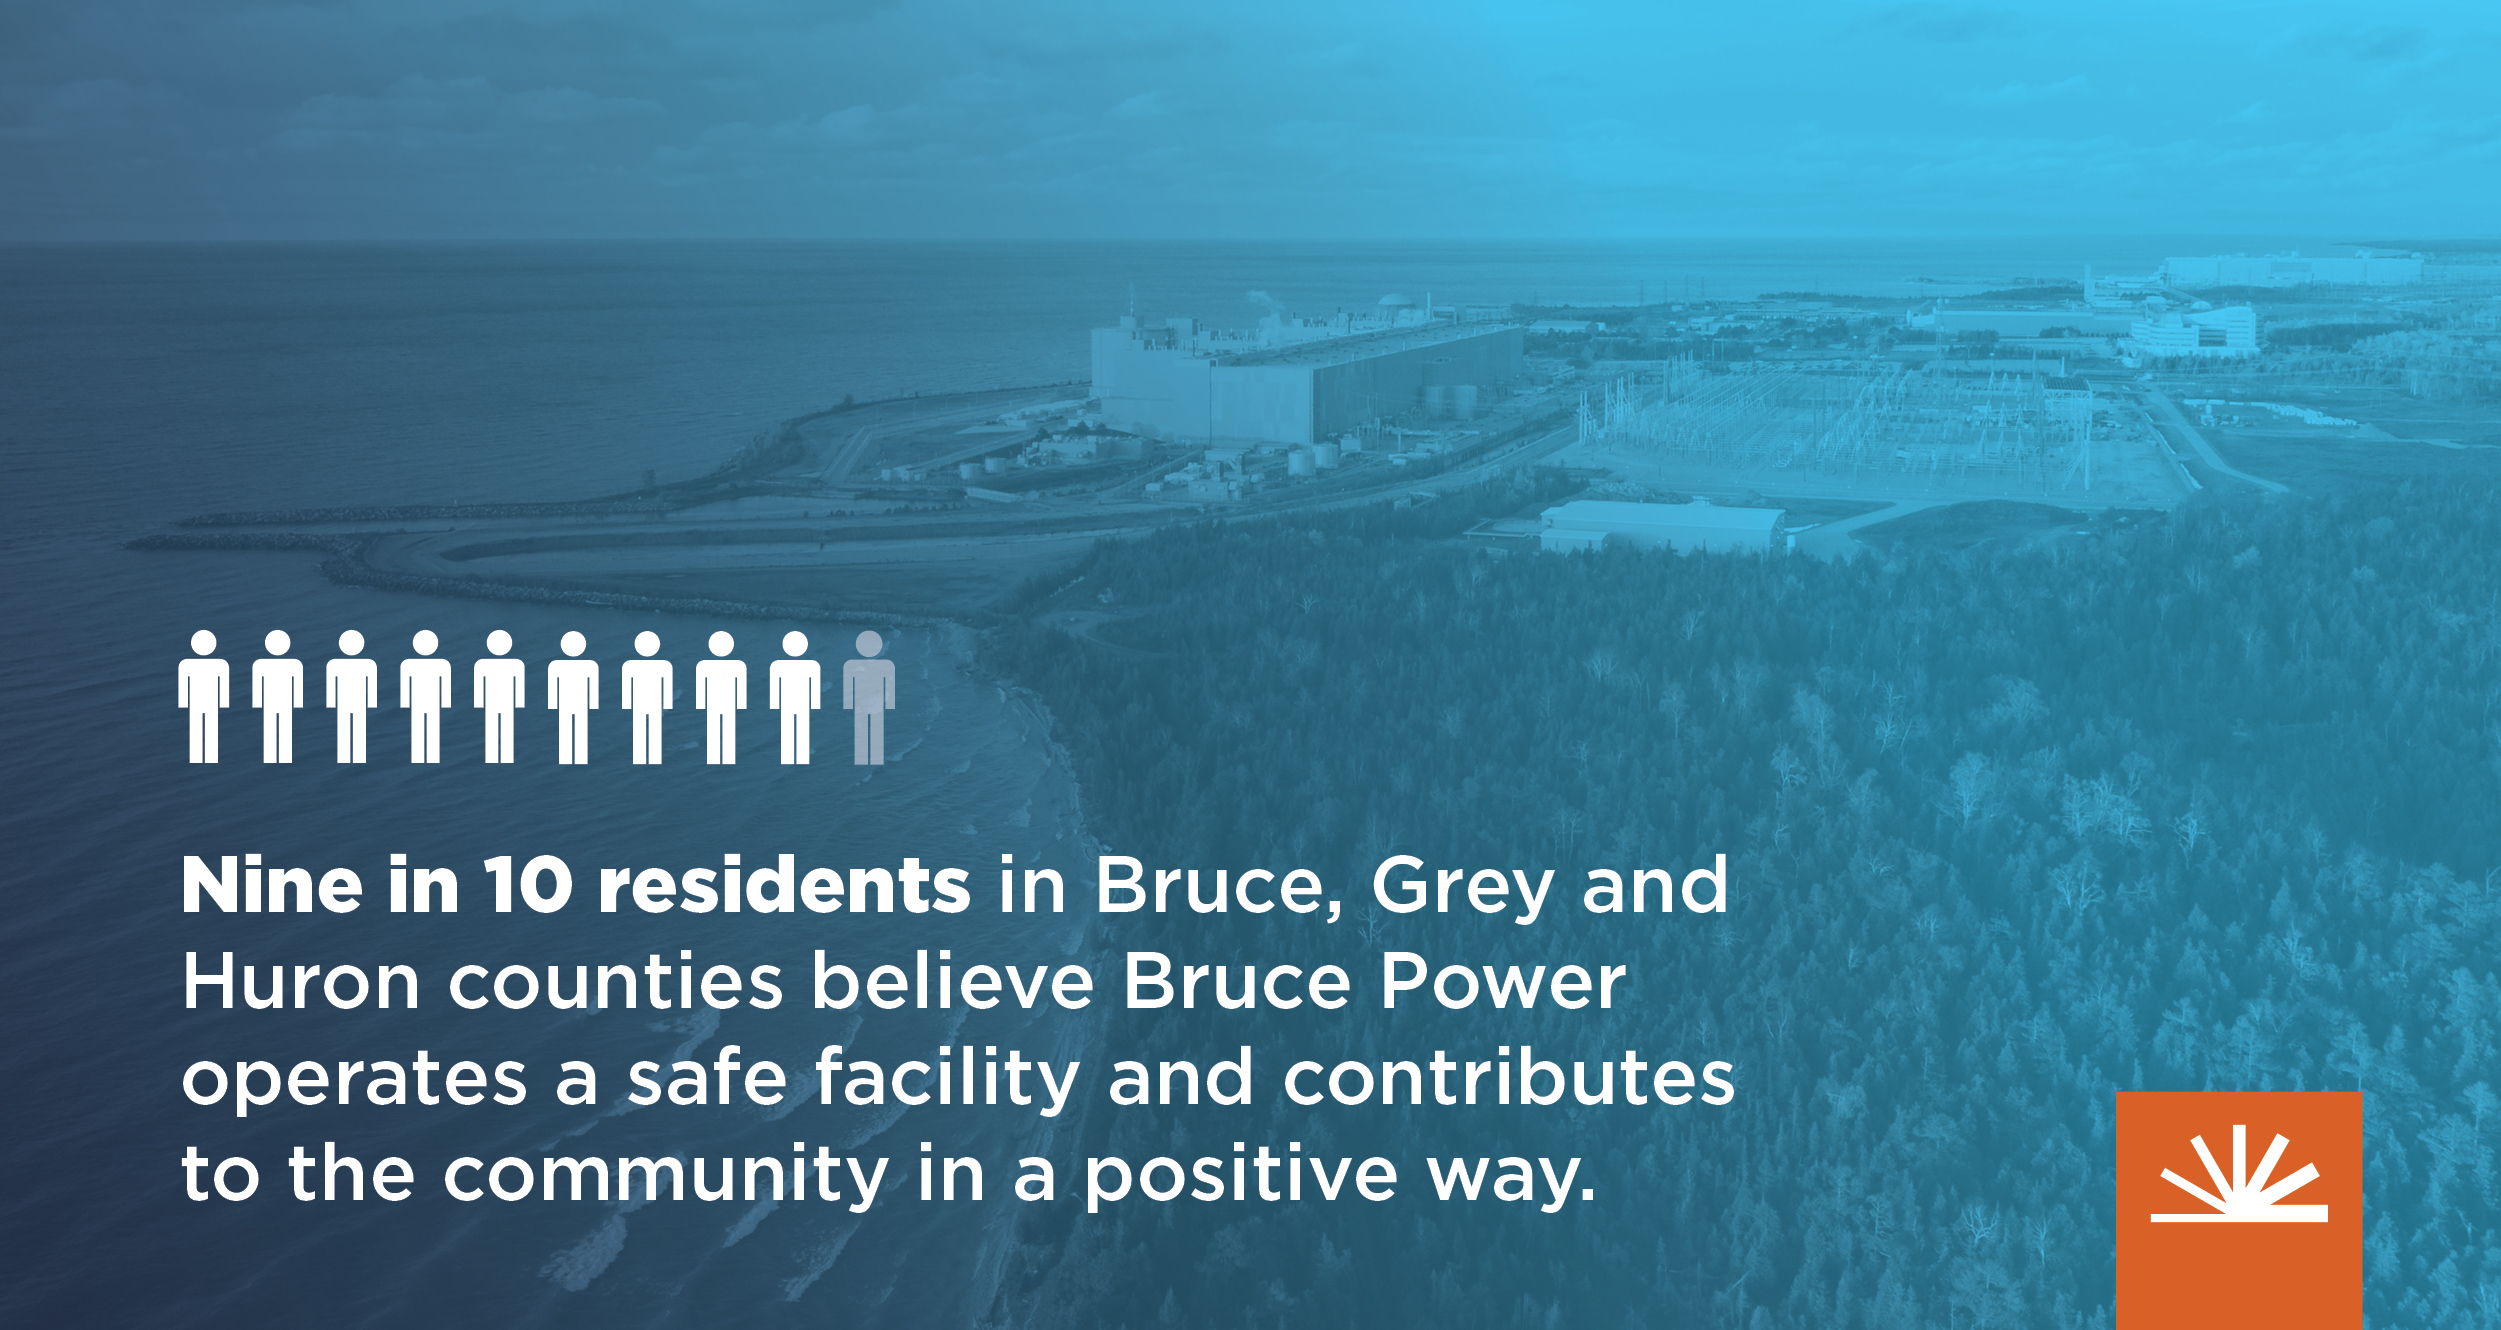 poll stat: 9 in 10 residents in Bruce, Grey, and Huron counties believe Bruce Power operates a safe facility and contributes to the community in a positive way